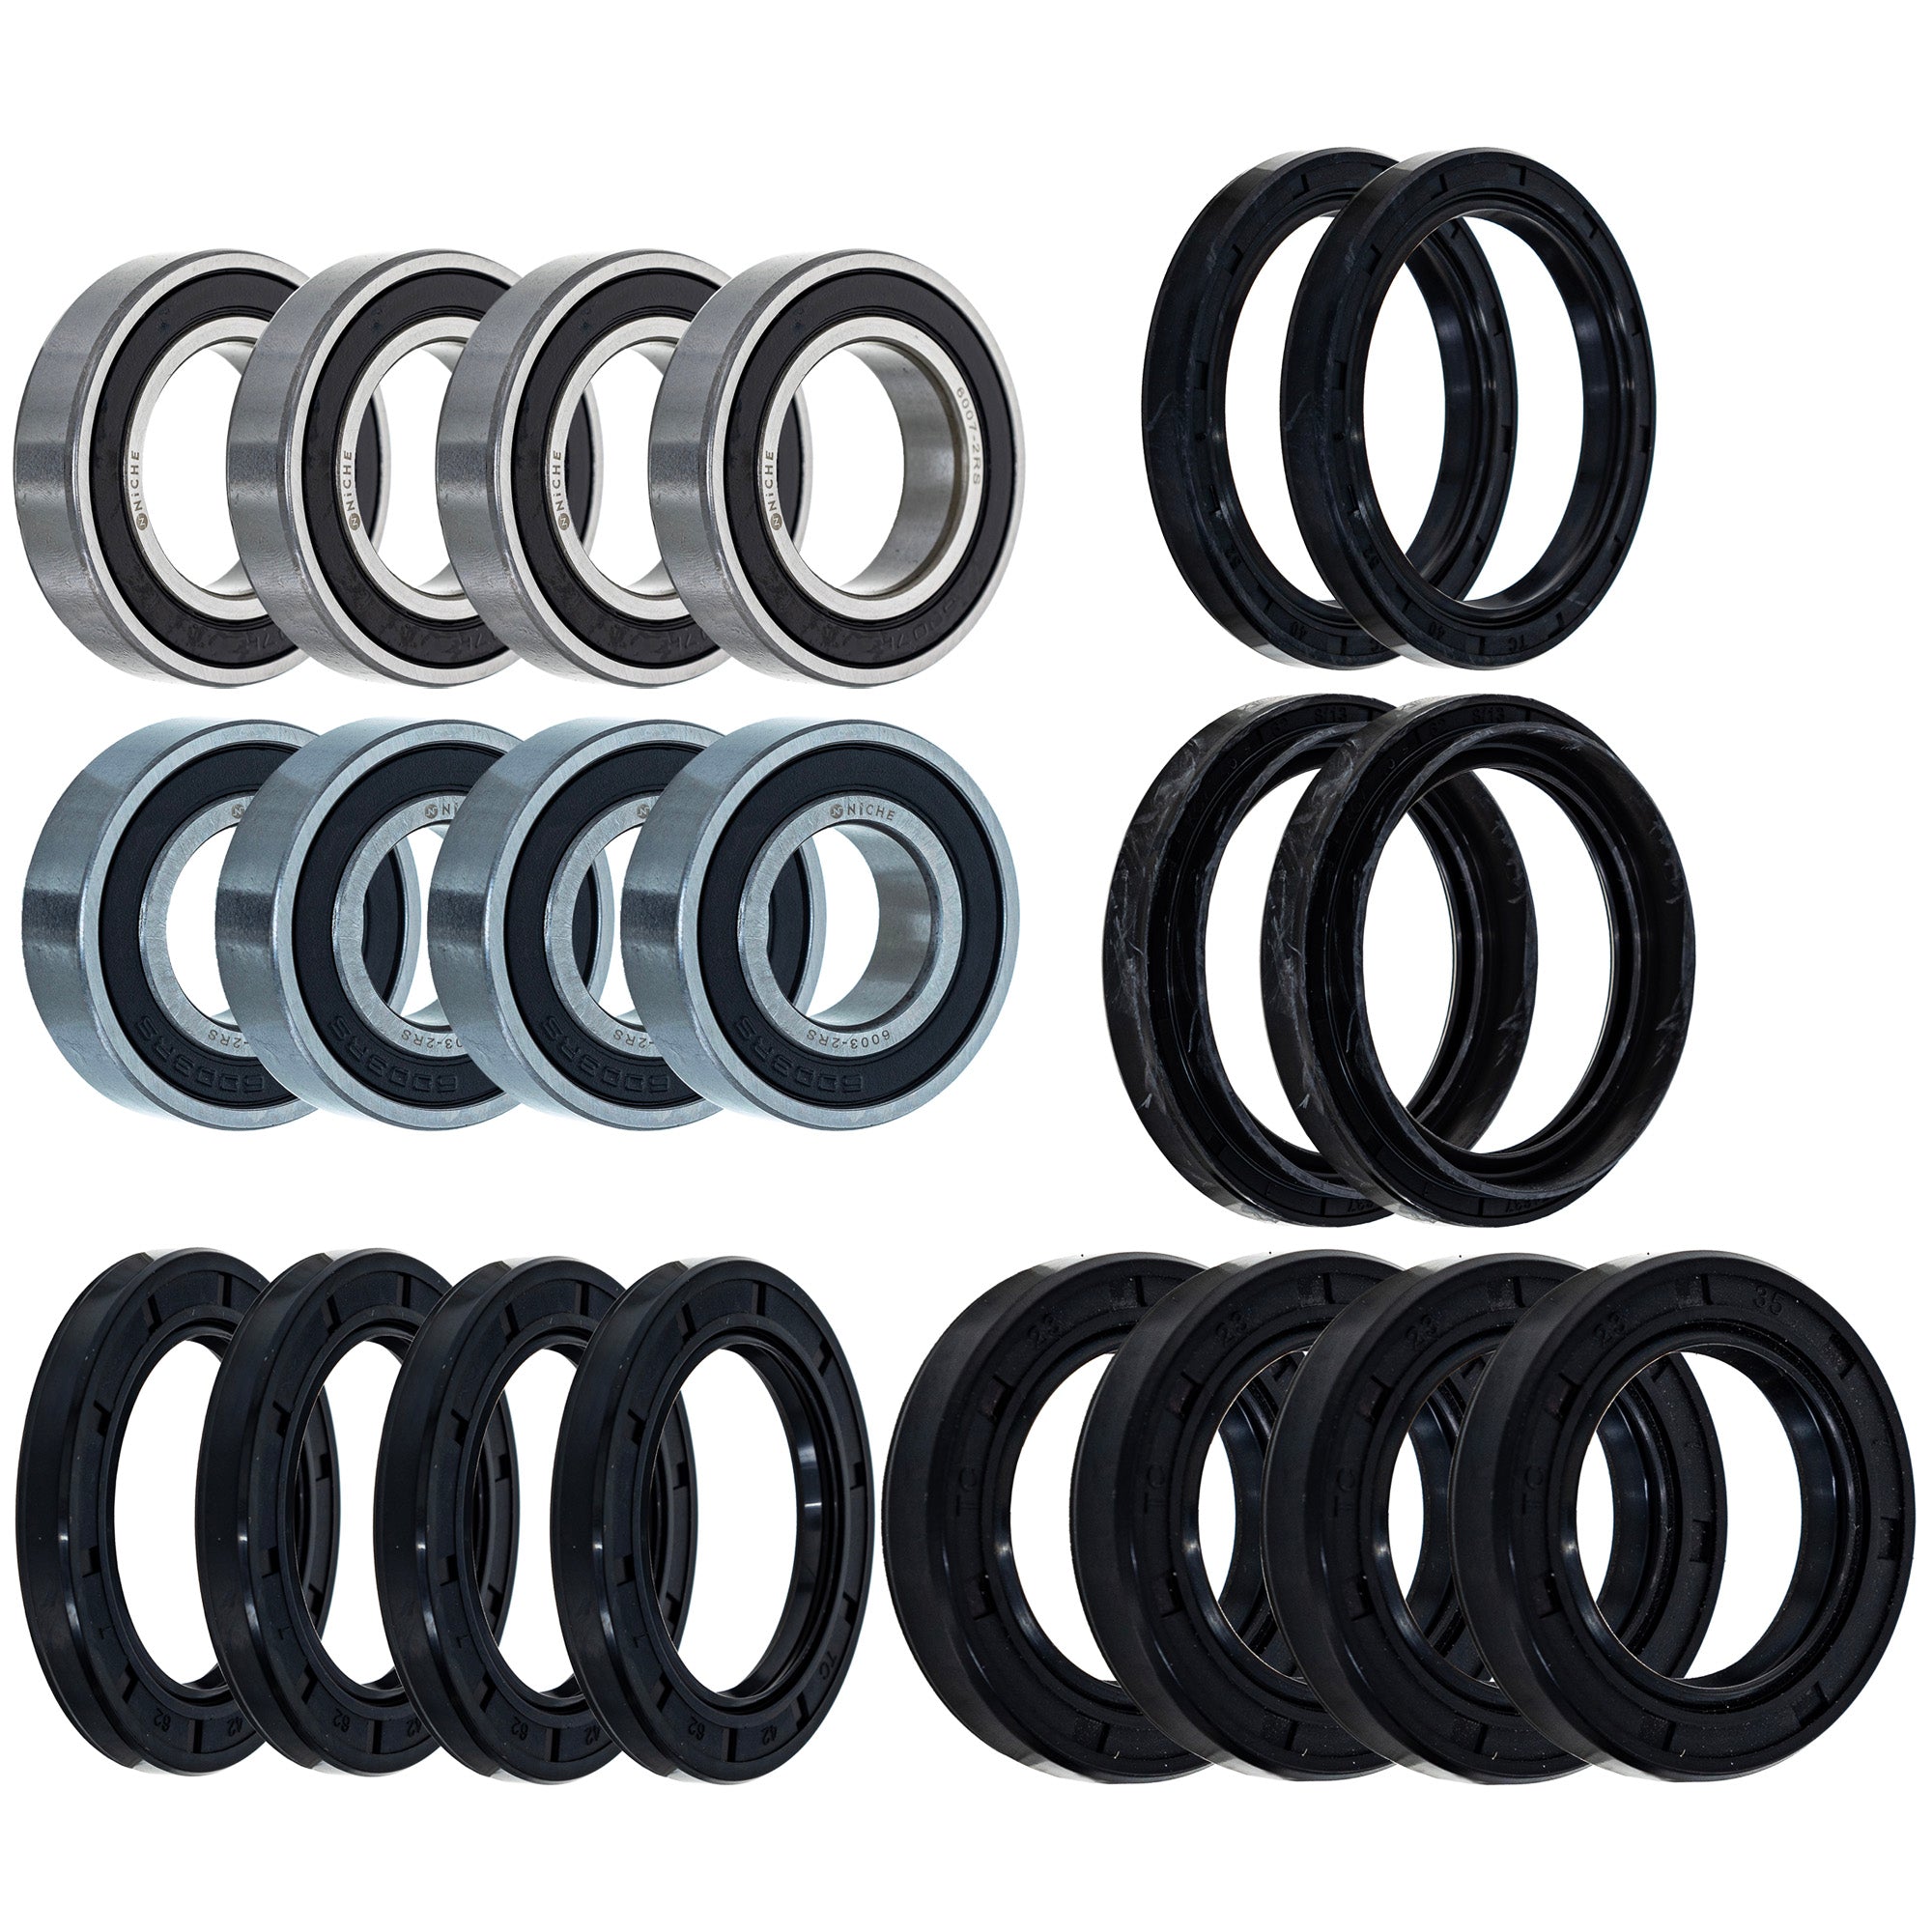 Wheel Bearing Seal Kit for zOTHER FourTrax NICHE MK1008351